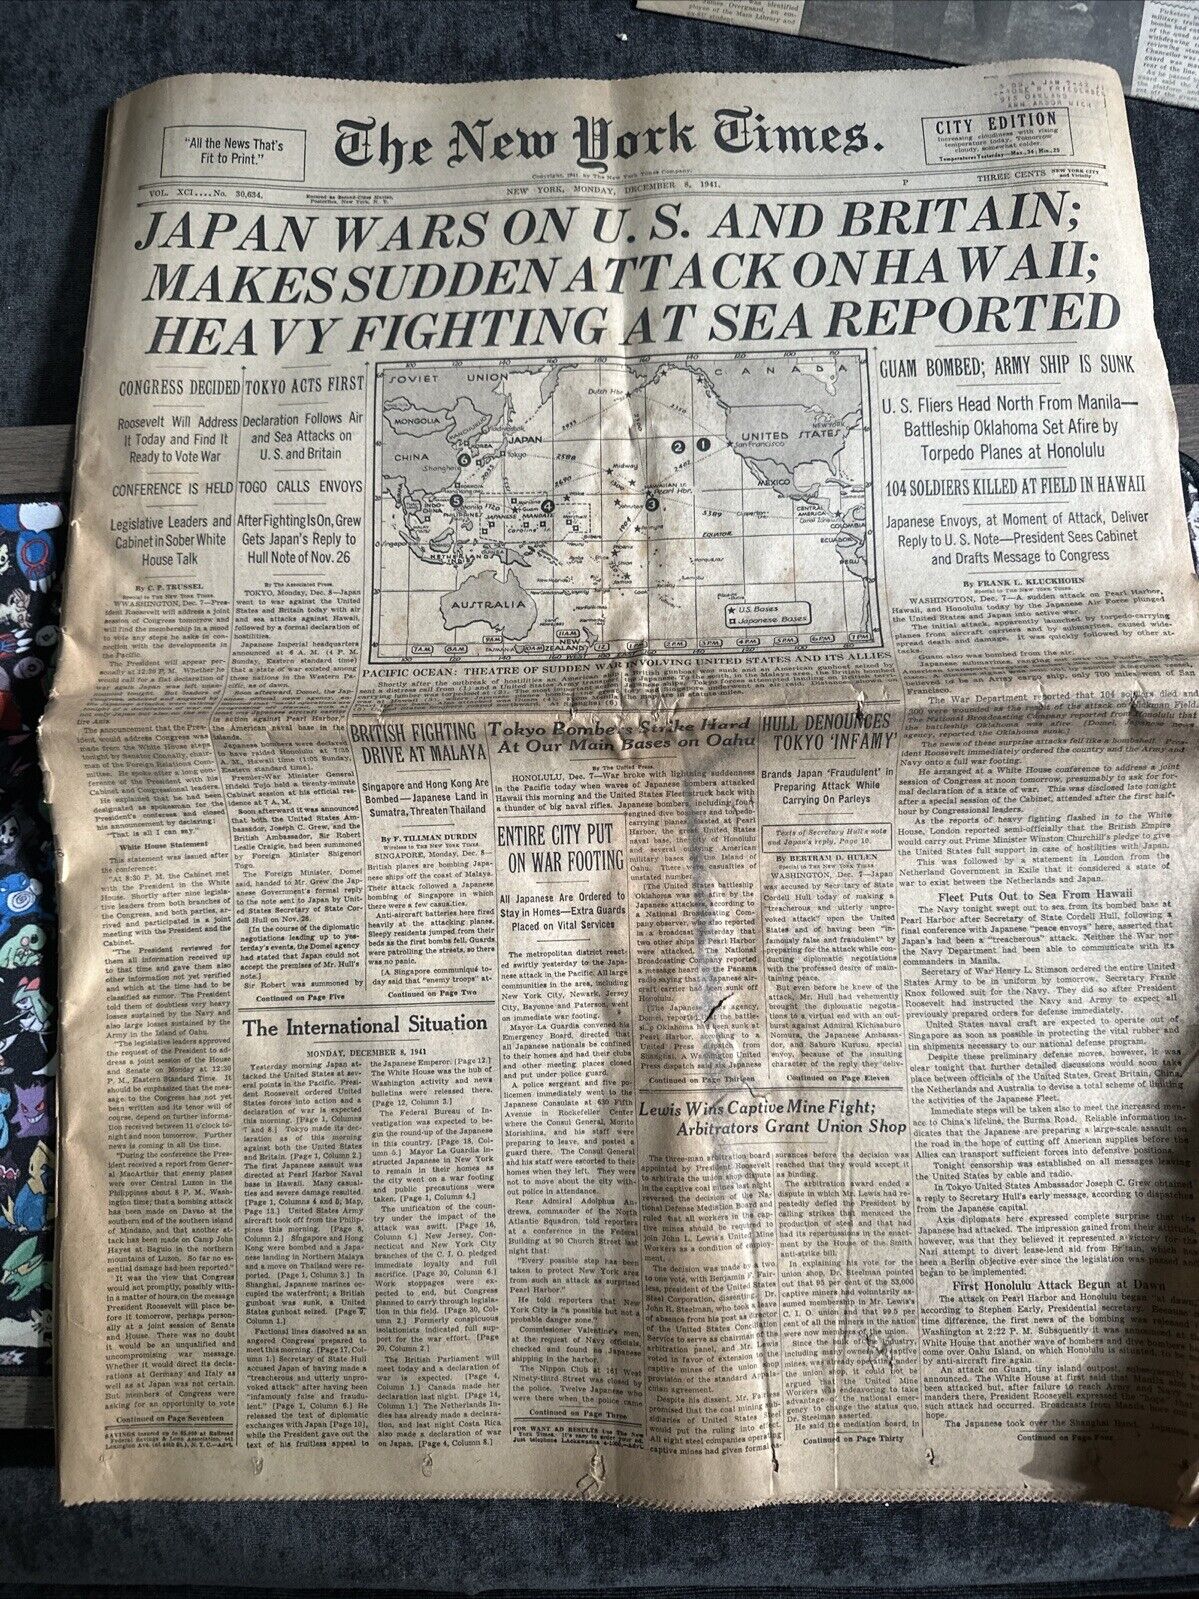 New York Times Japan War on U.S and Britain Monday December 8th, 1941